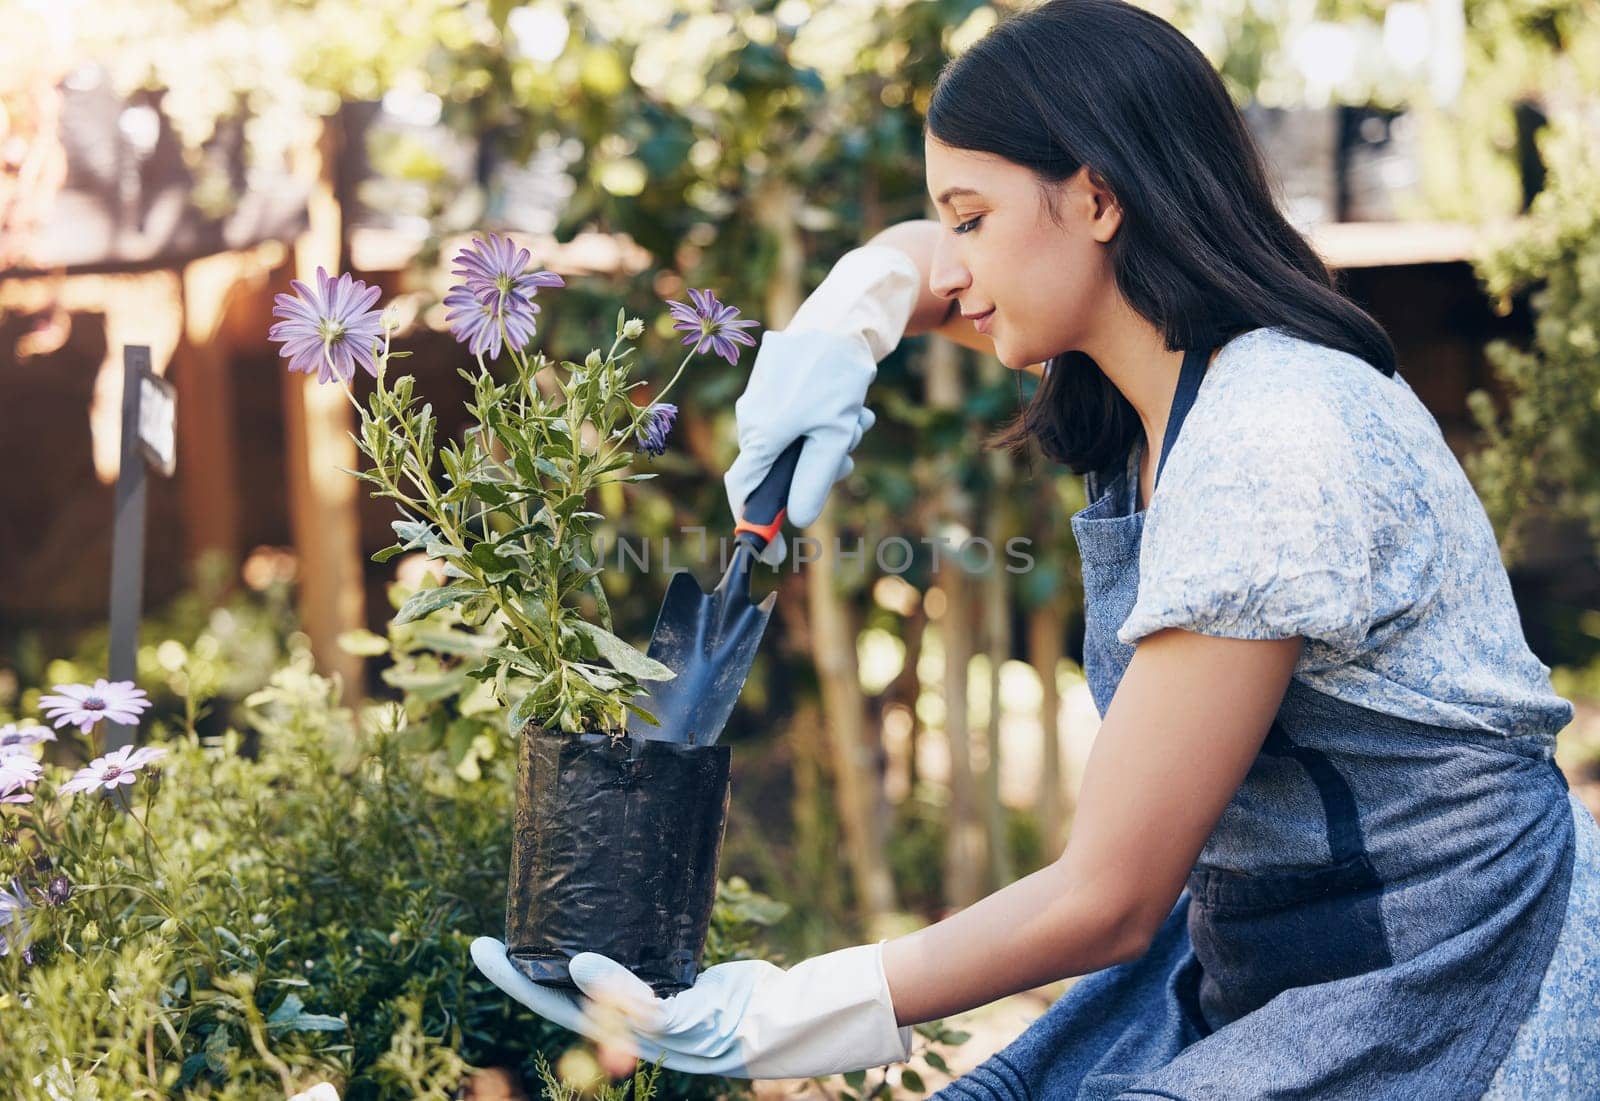 Woman, work and plants with shovel for gardening at store in startup with passion for relax with nature. Green, florist and shop with purple daisy for selling in spring for growth with enjoyment.